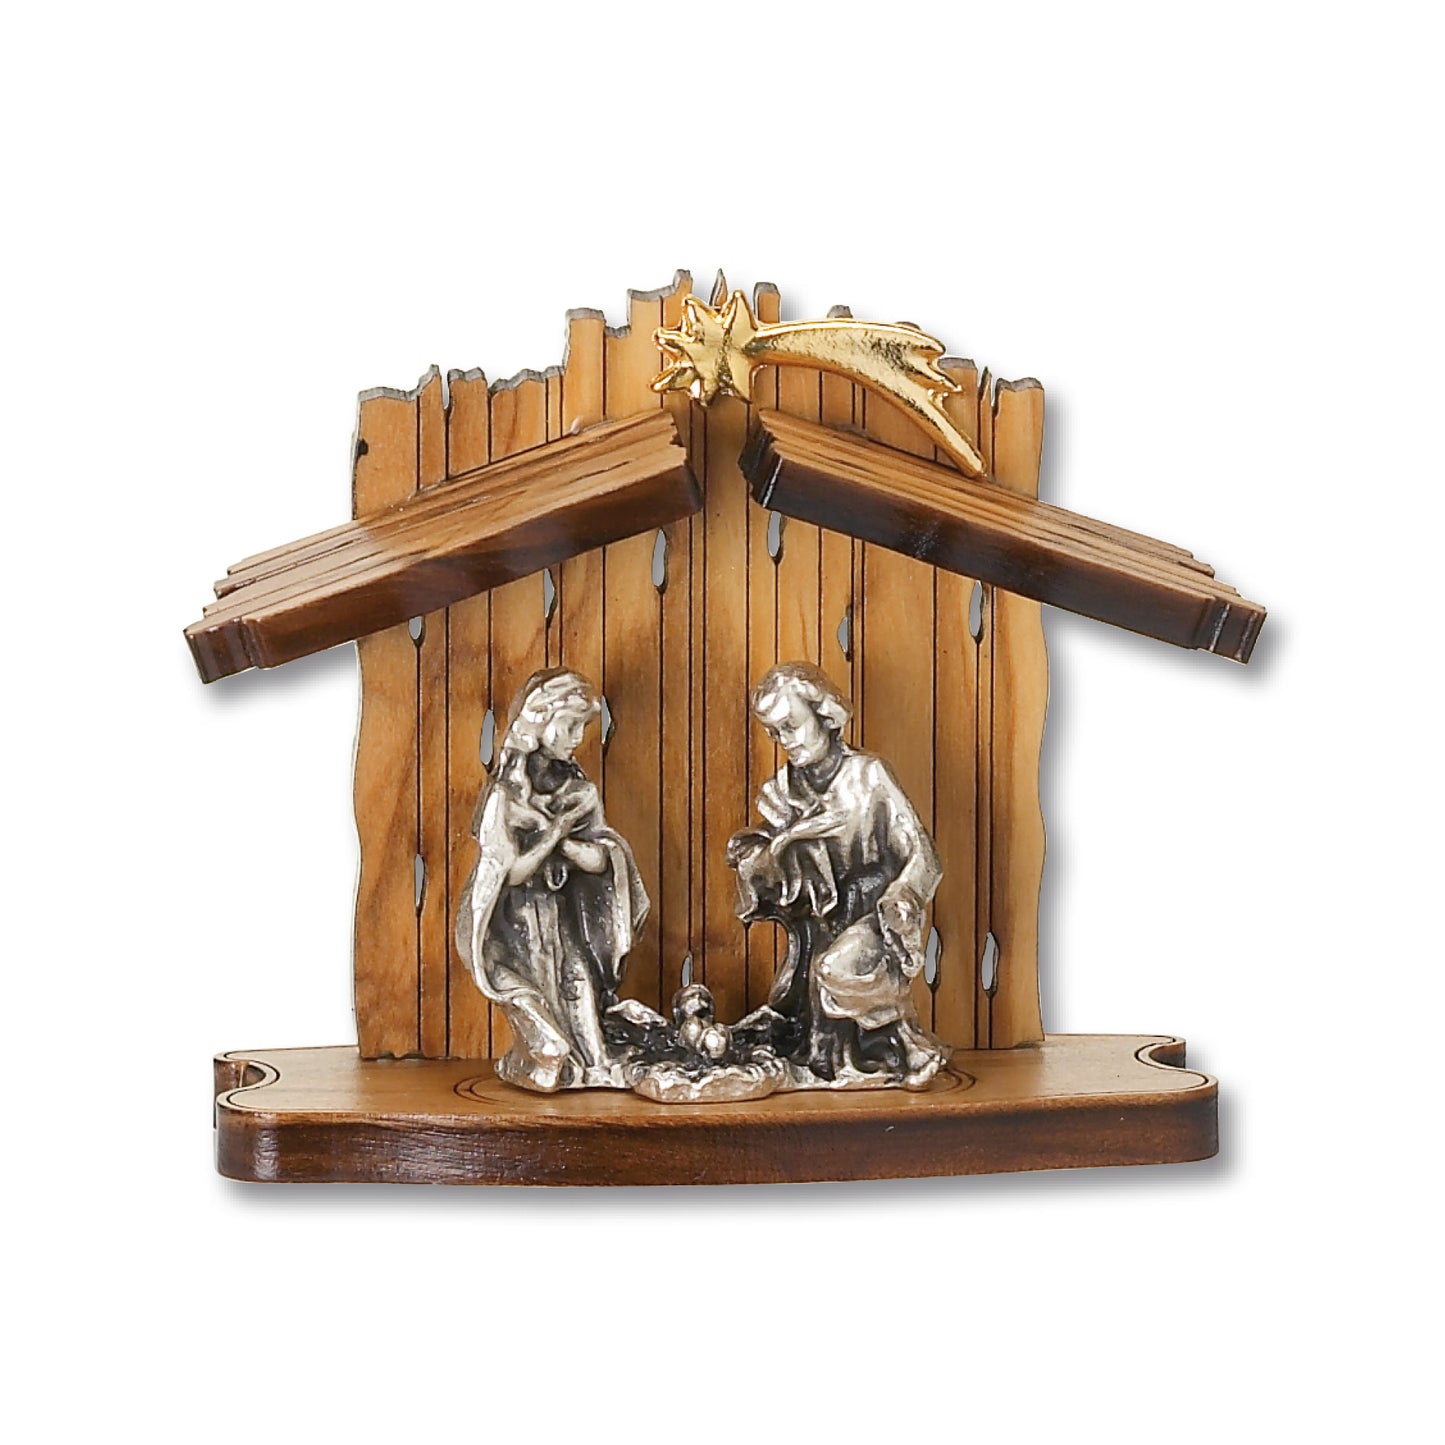 Olive Wood and Metal Nativity scene, Size 2 3/4x2 1/2 Inch